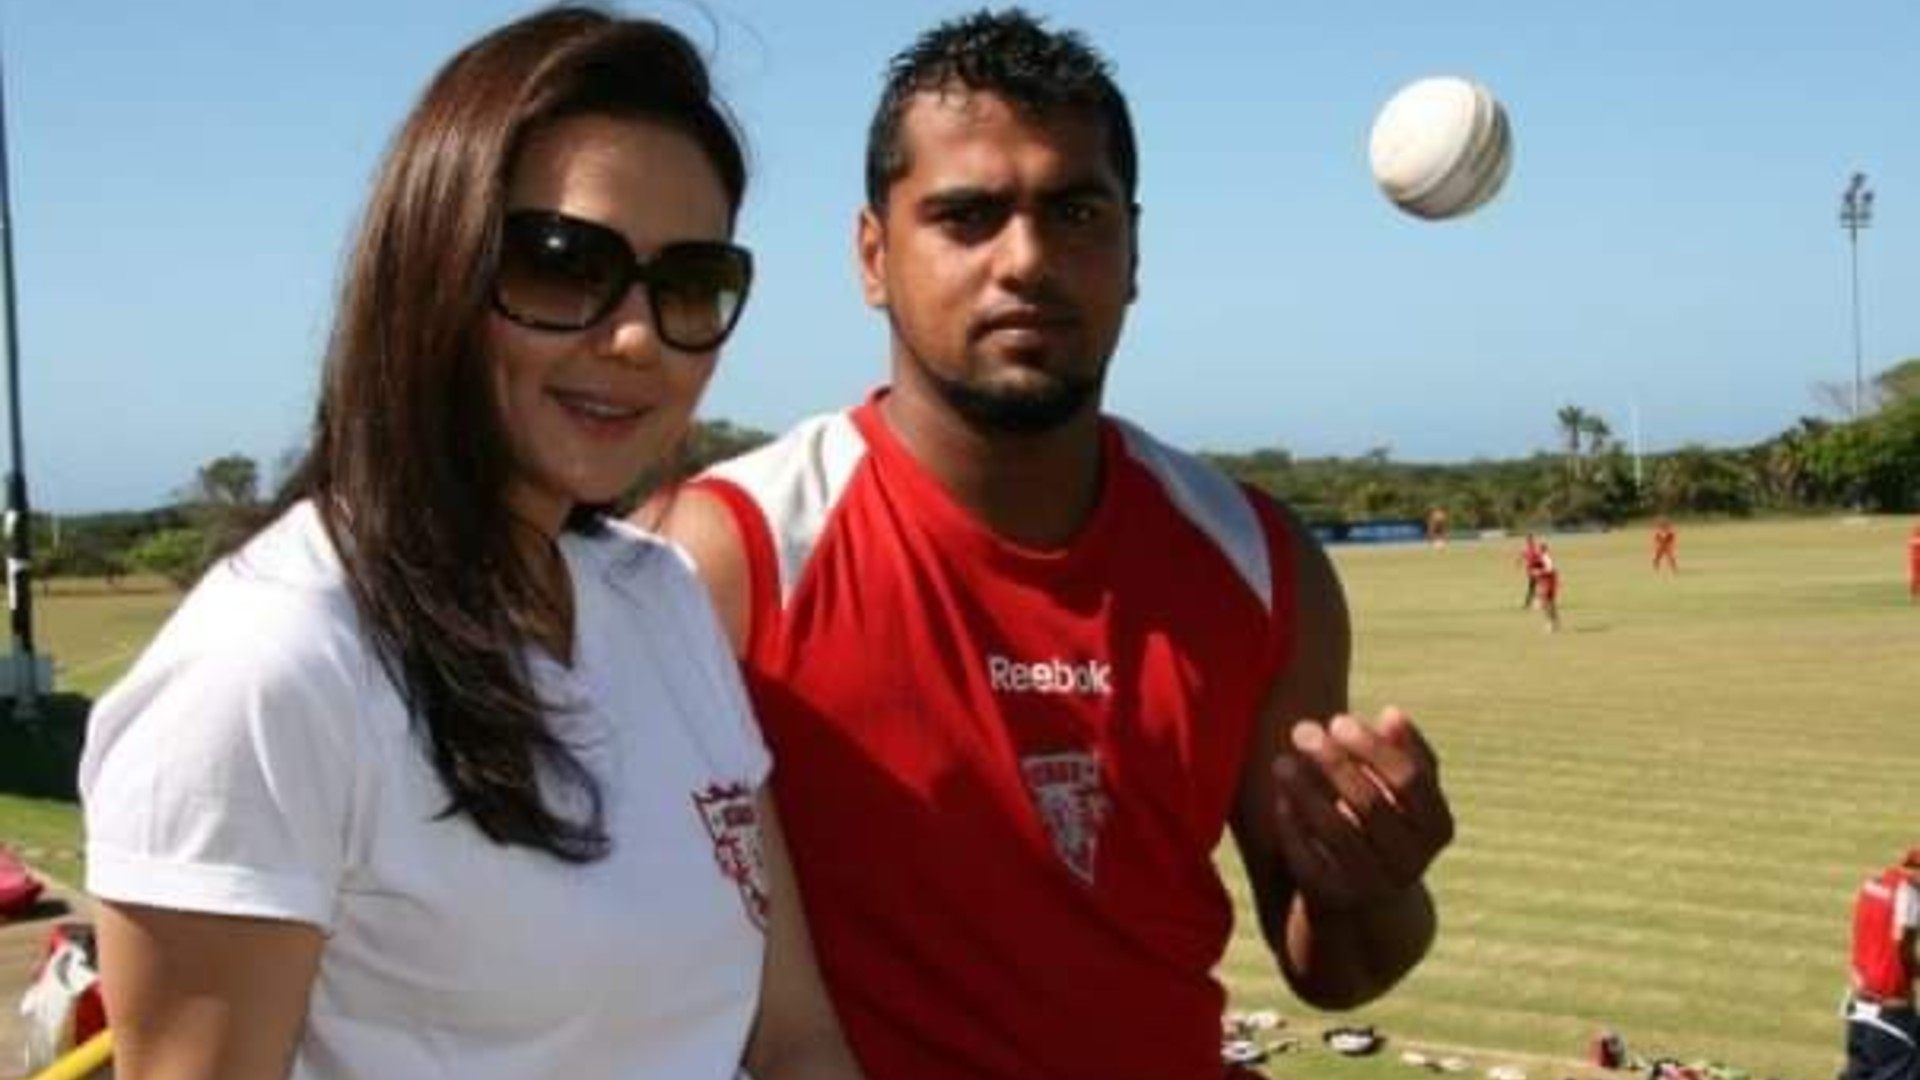 Yusuf Abdulla can be seen posing with the ball alongside Preity Zinta, who is the owner of the Punjab-based IPL franchise.